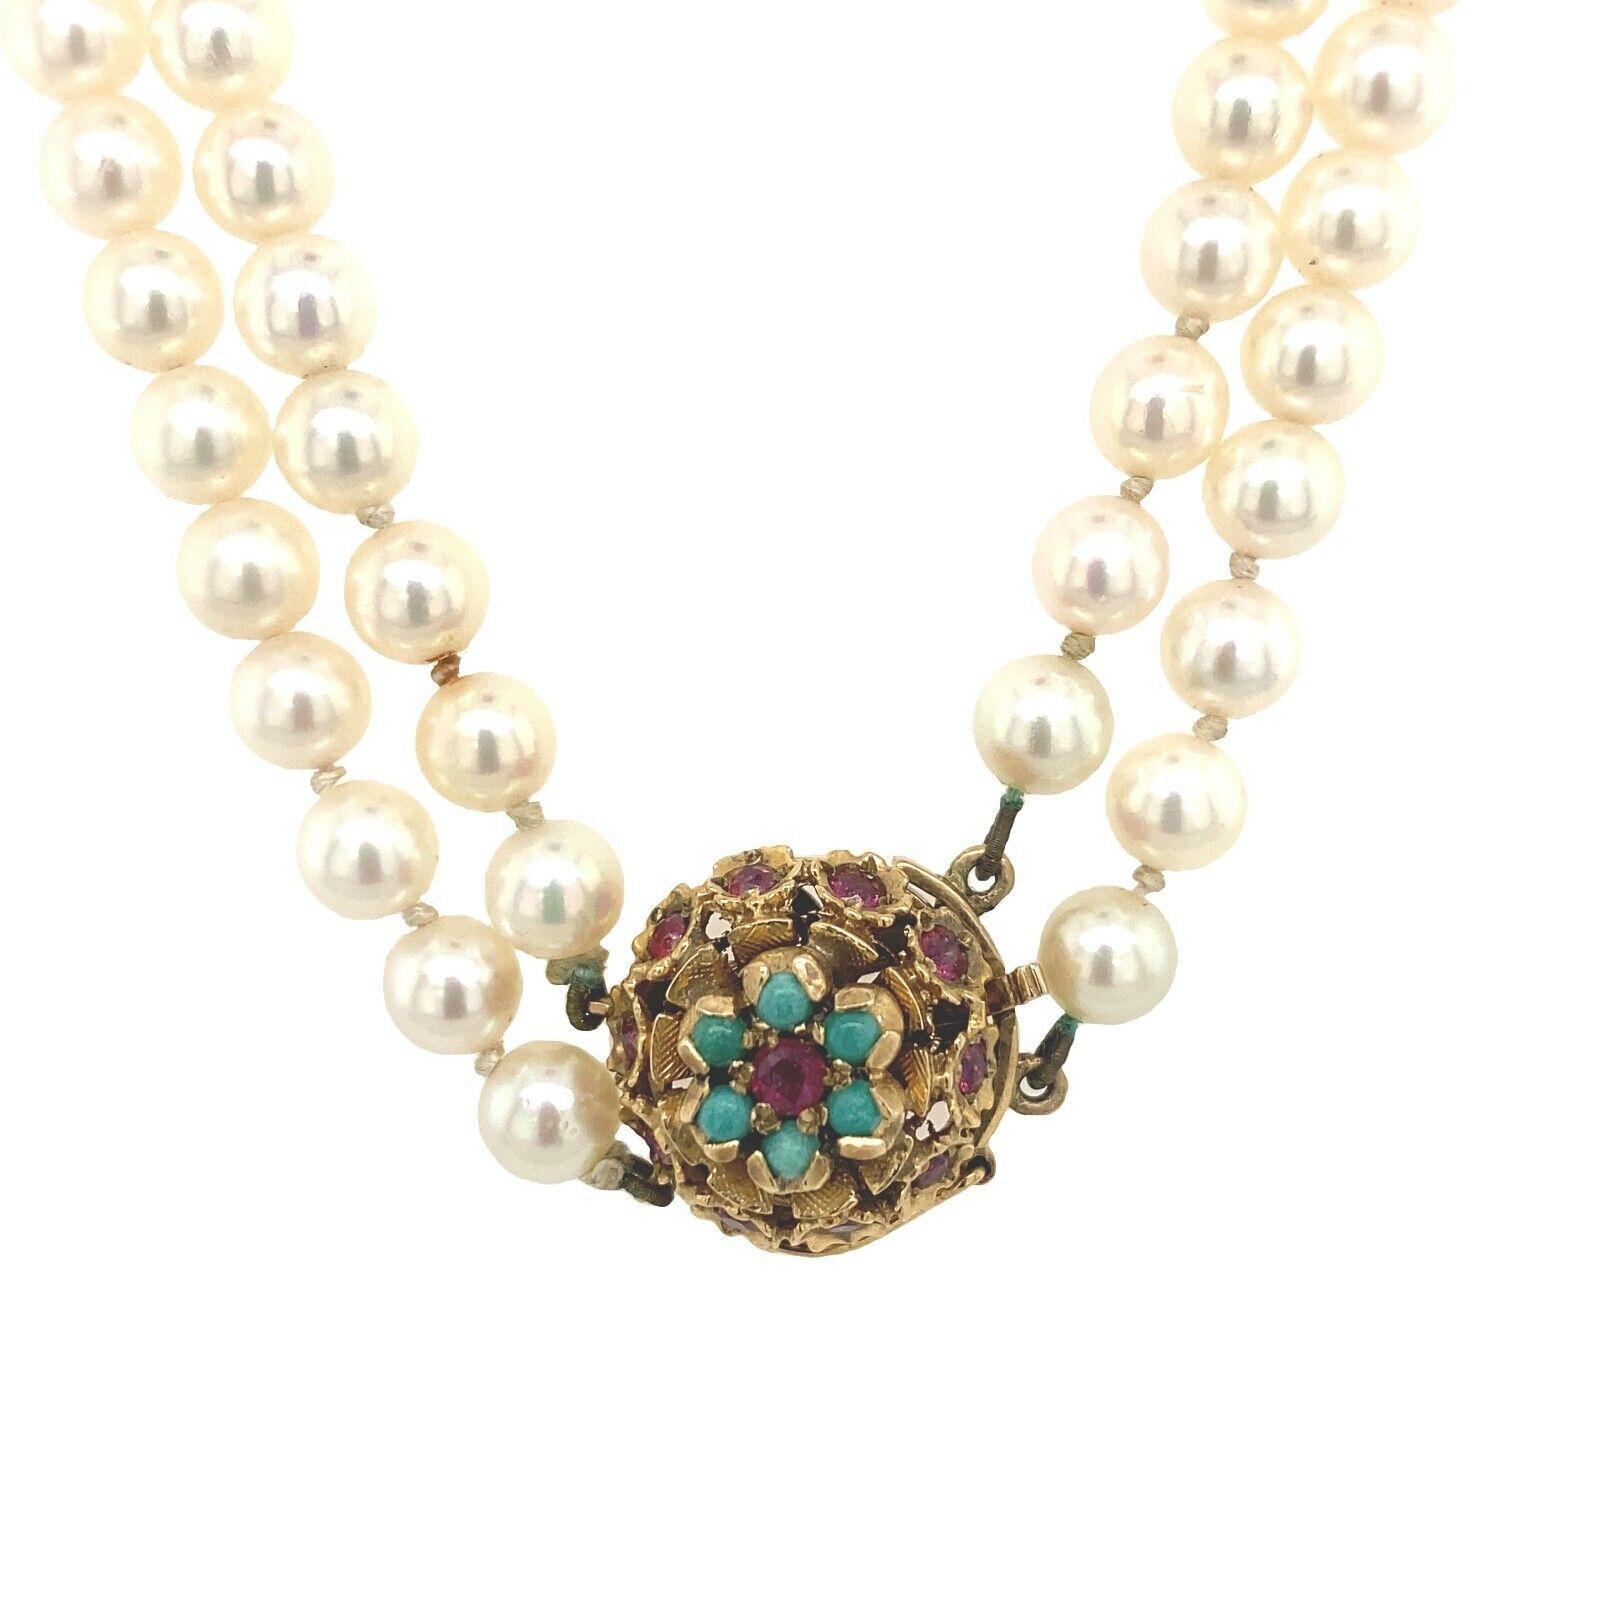 2 Row Uniform Cultured Pearl Necklace, With 9ct Gold Coloured Stone Clasp In Excellent Condition For Sale In London, GB